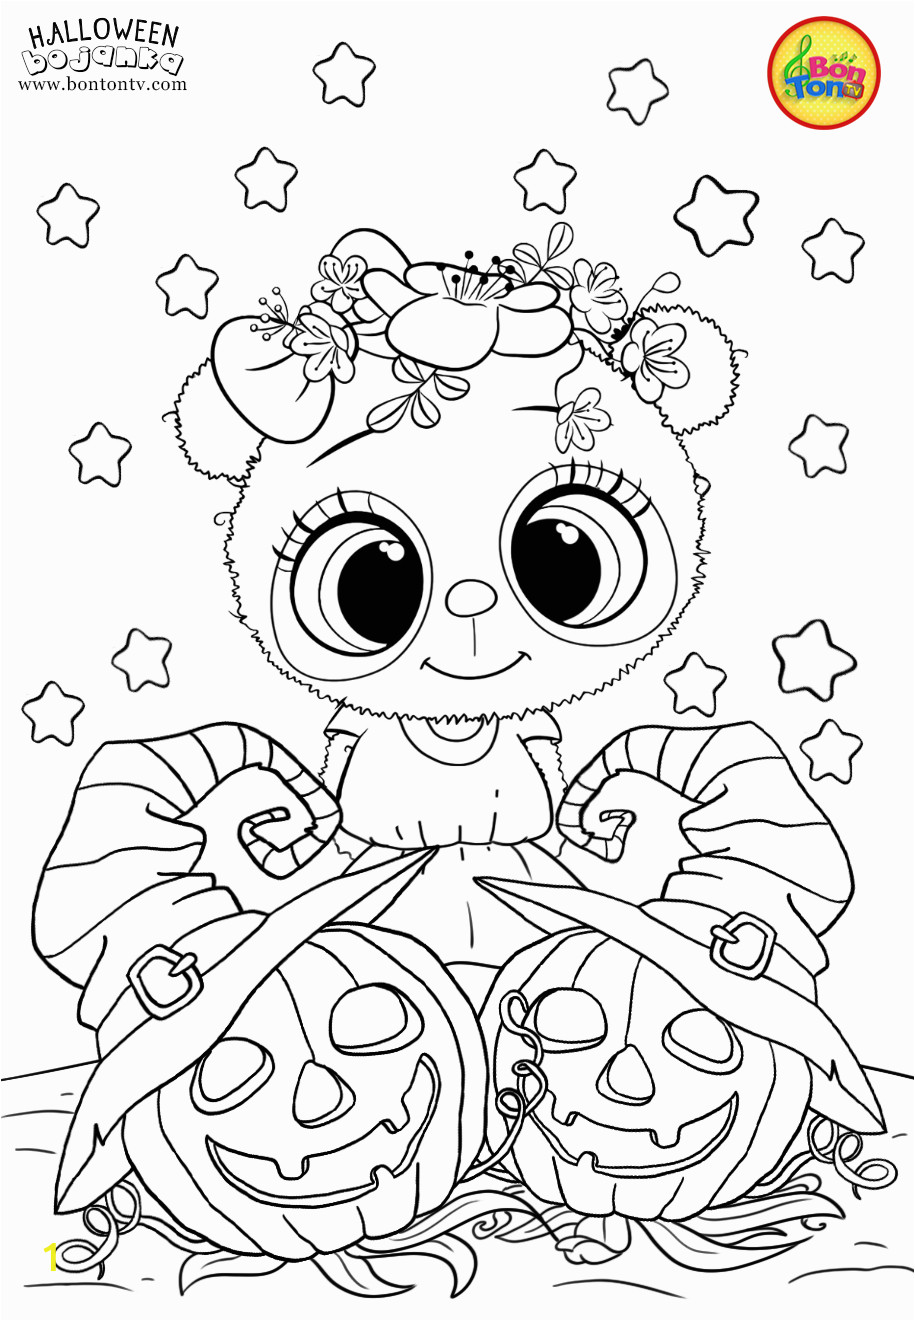 Cute Witch Coloring Pages | divyajanani.org